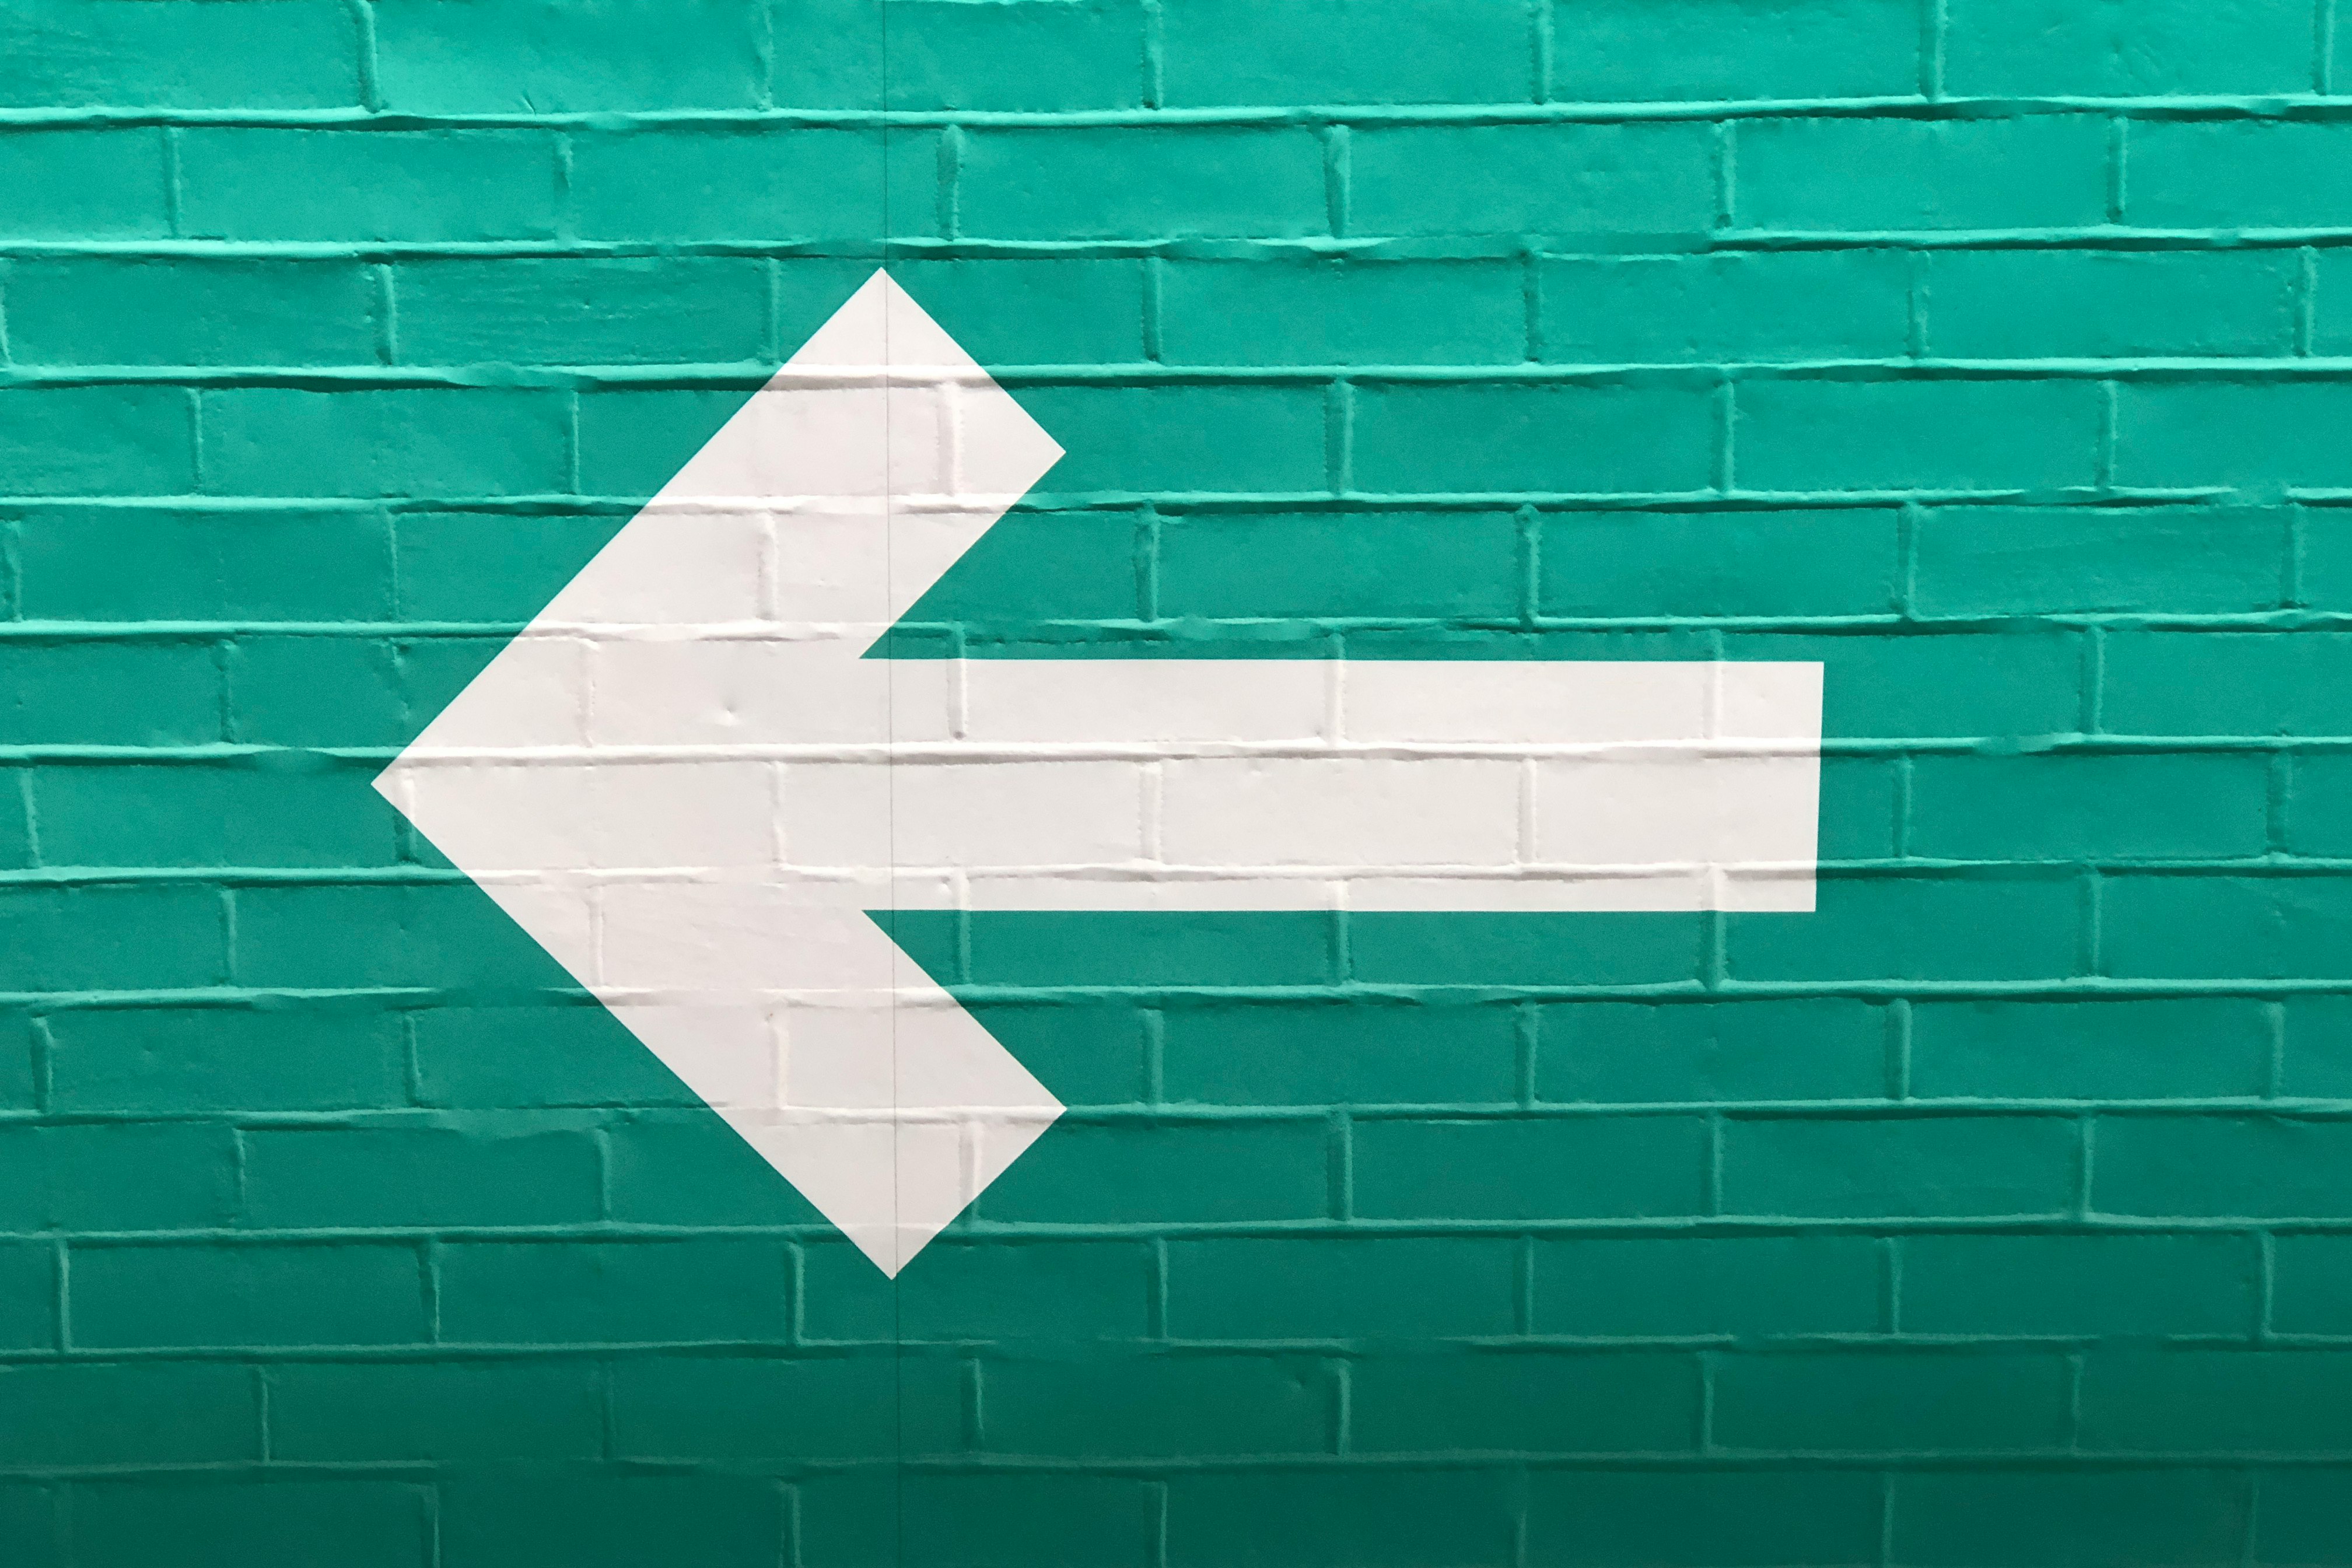 Further to me posting a white arrow on a blue wall, pointing right, here is the other, a white arrow on a green wall, pointing left.